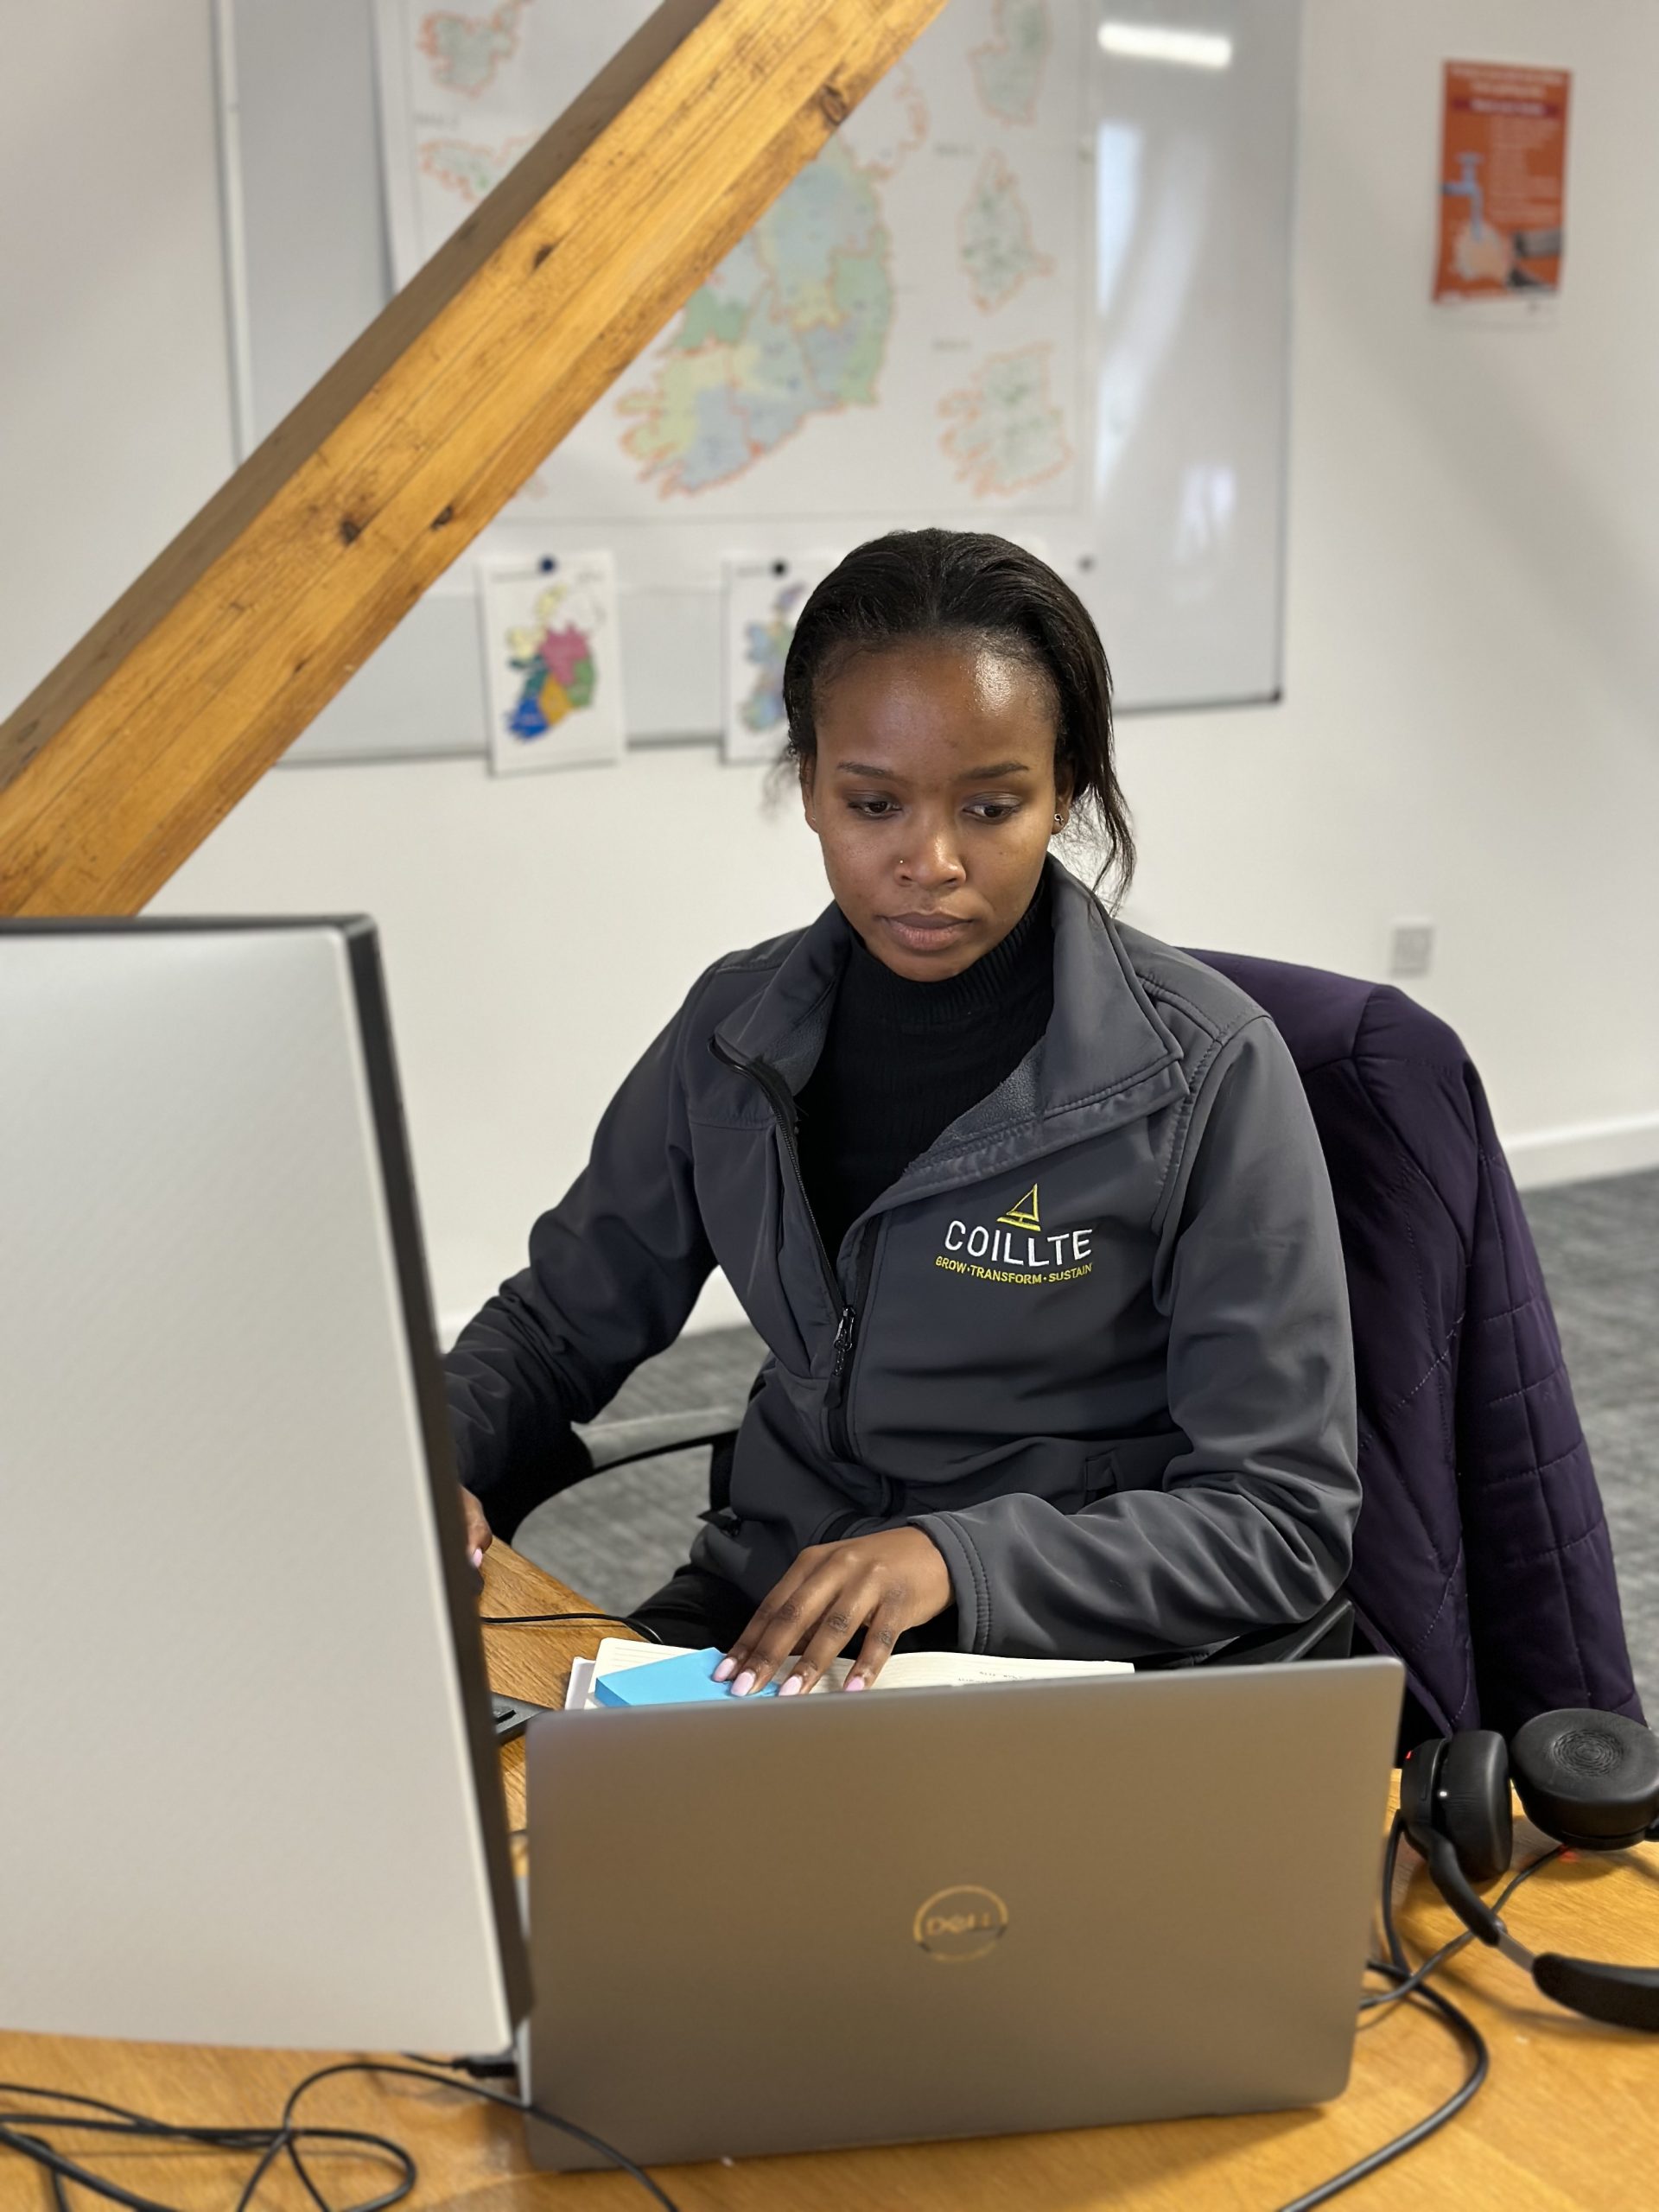 Picture of Coillte Graduate, Sharon, working in an office at a laptop and desktop computer